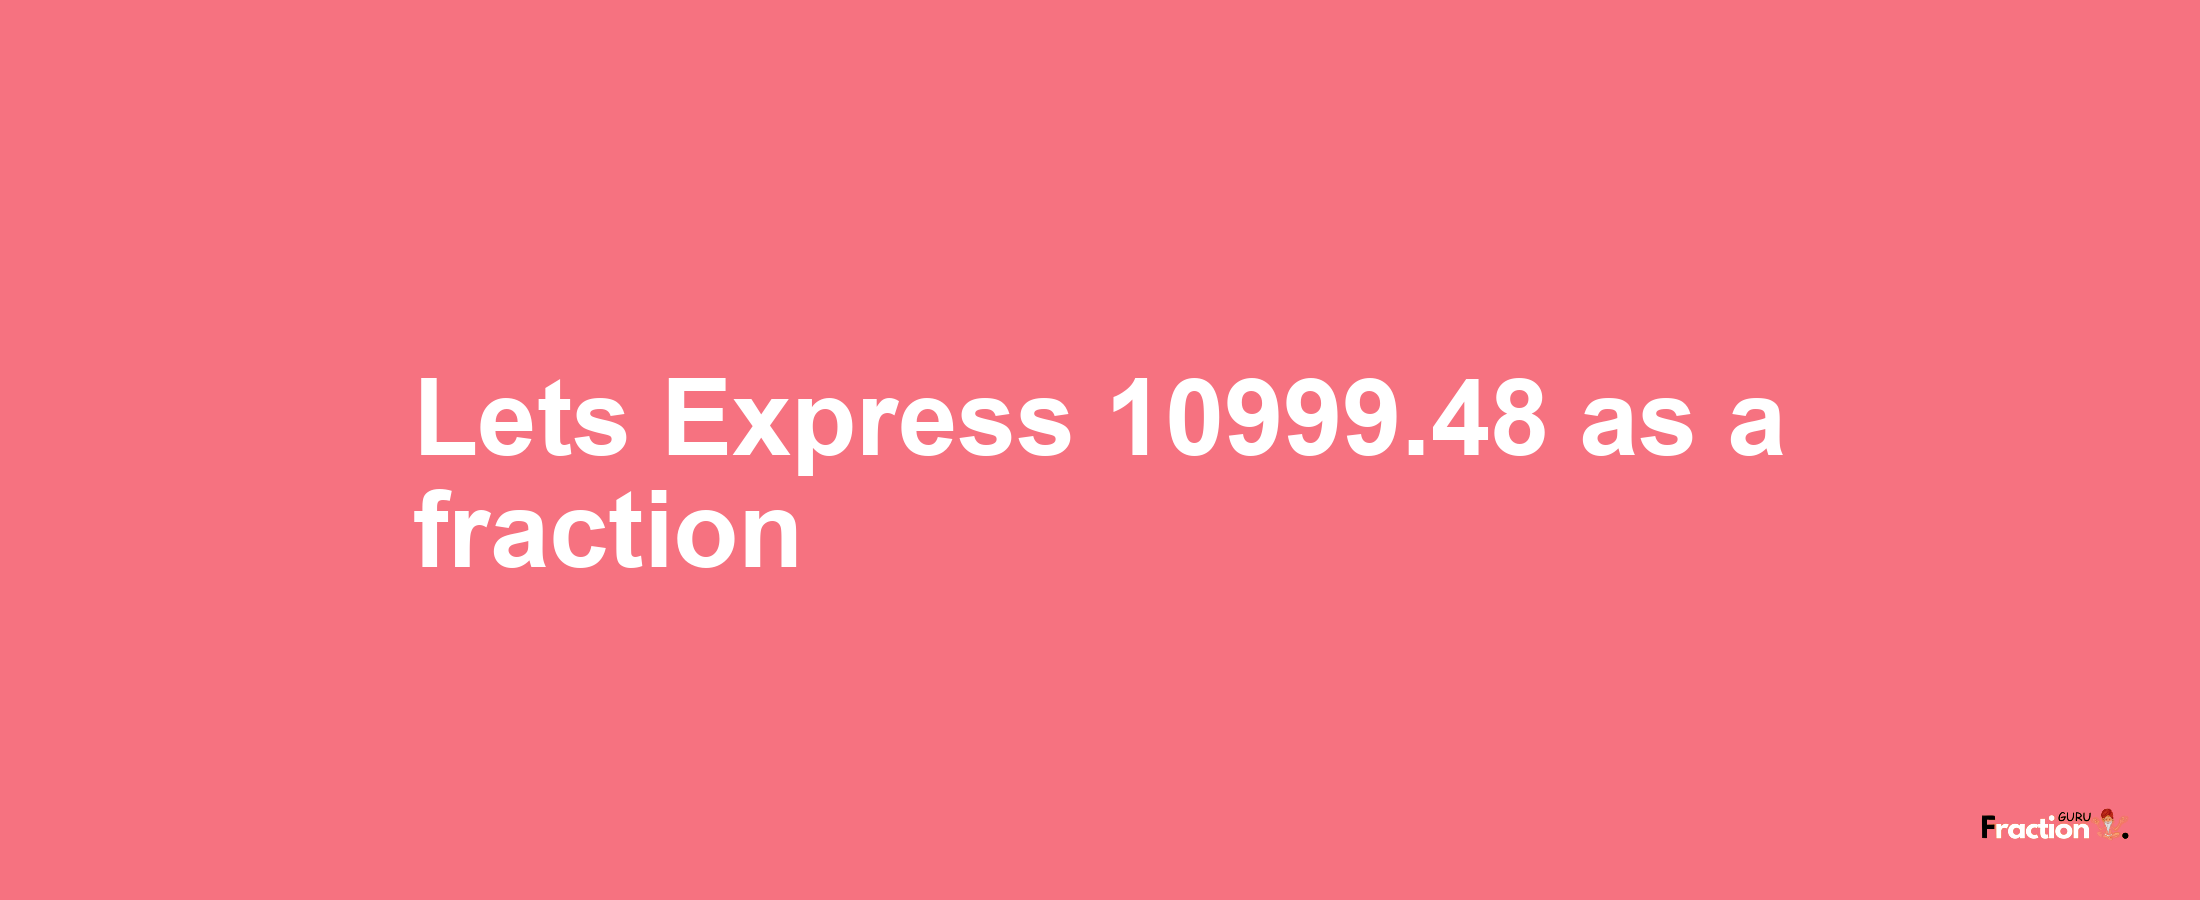 Lets Express 10999.48 as afraction